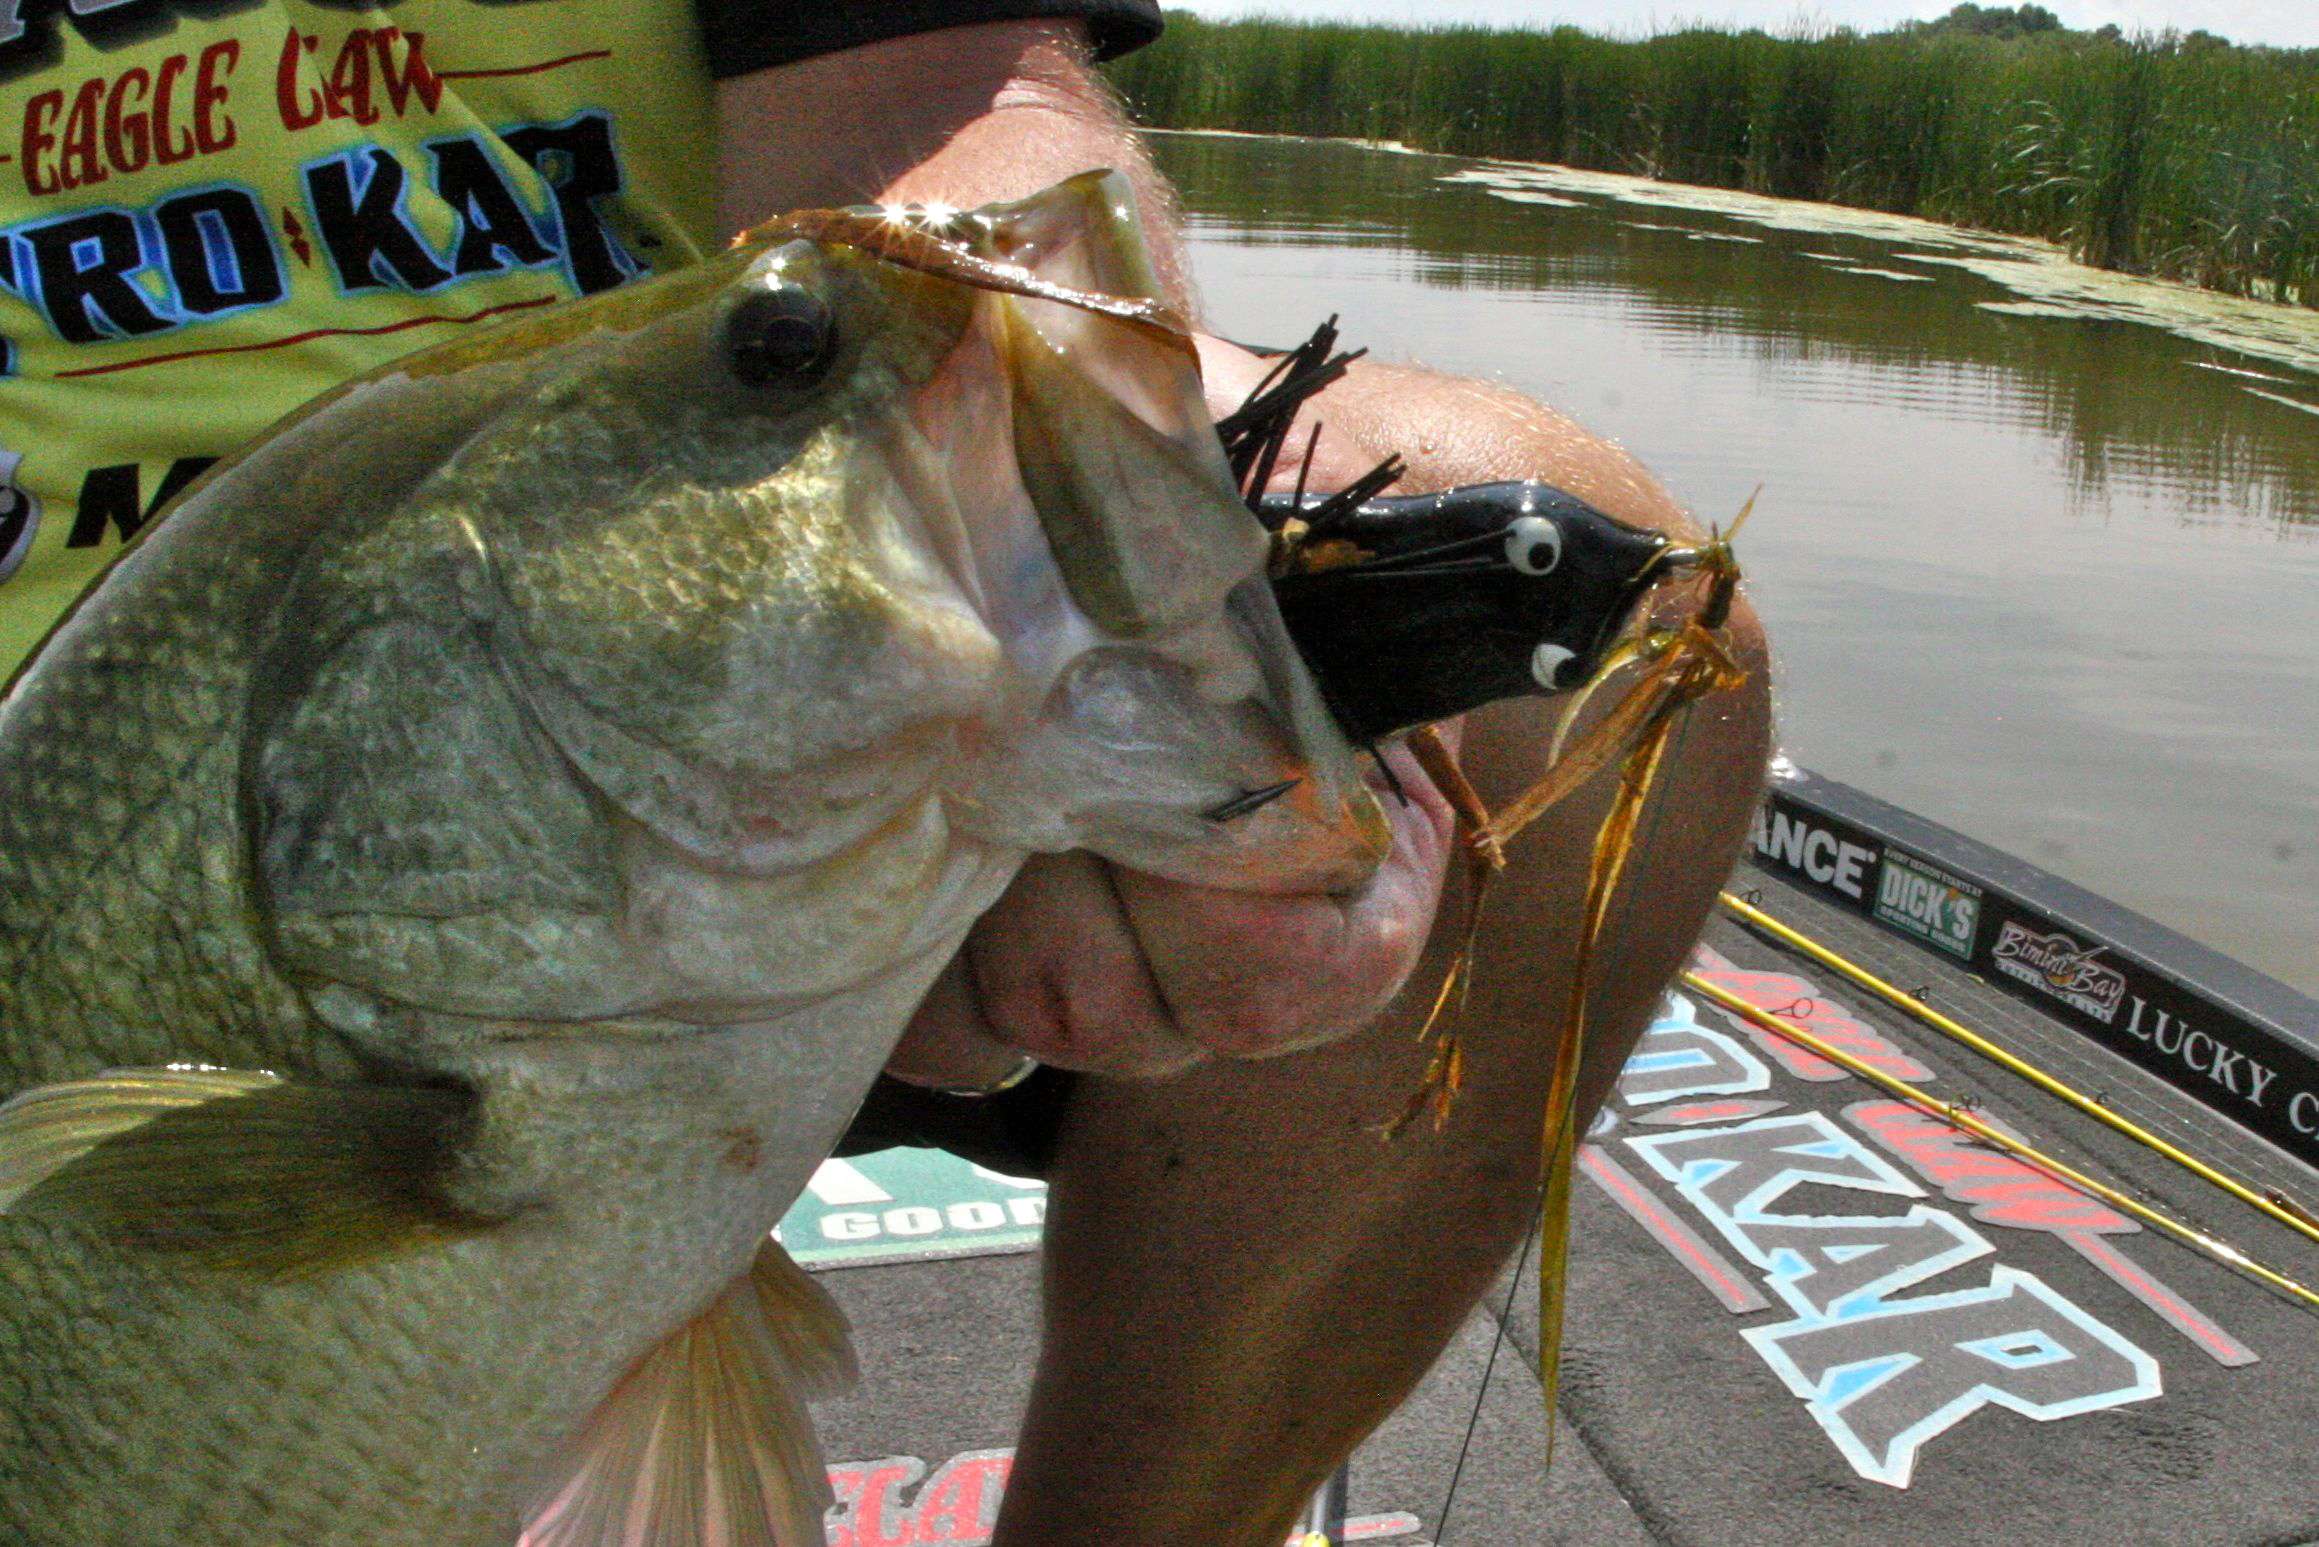 Bass just kept chomping the frog. Not all the explosions resulted in hook-ups. After one monster splash and a miss, somehow, uh, Reese's rod ended up in my lap. But at 1:20, all the rats were overboard and Reese had nothing but 3-pounders in his livewells.